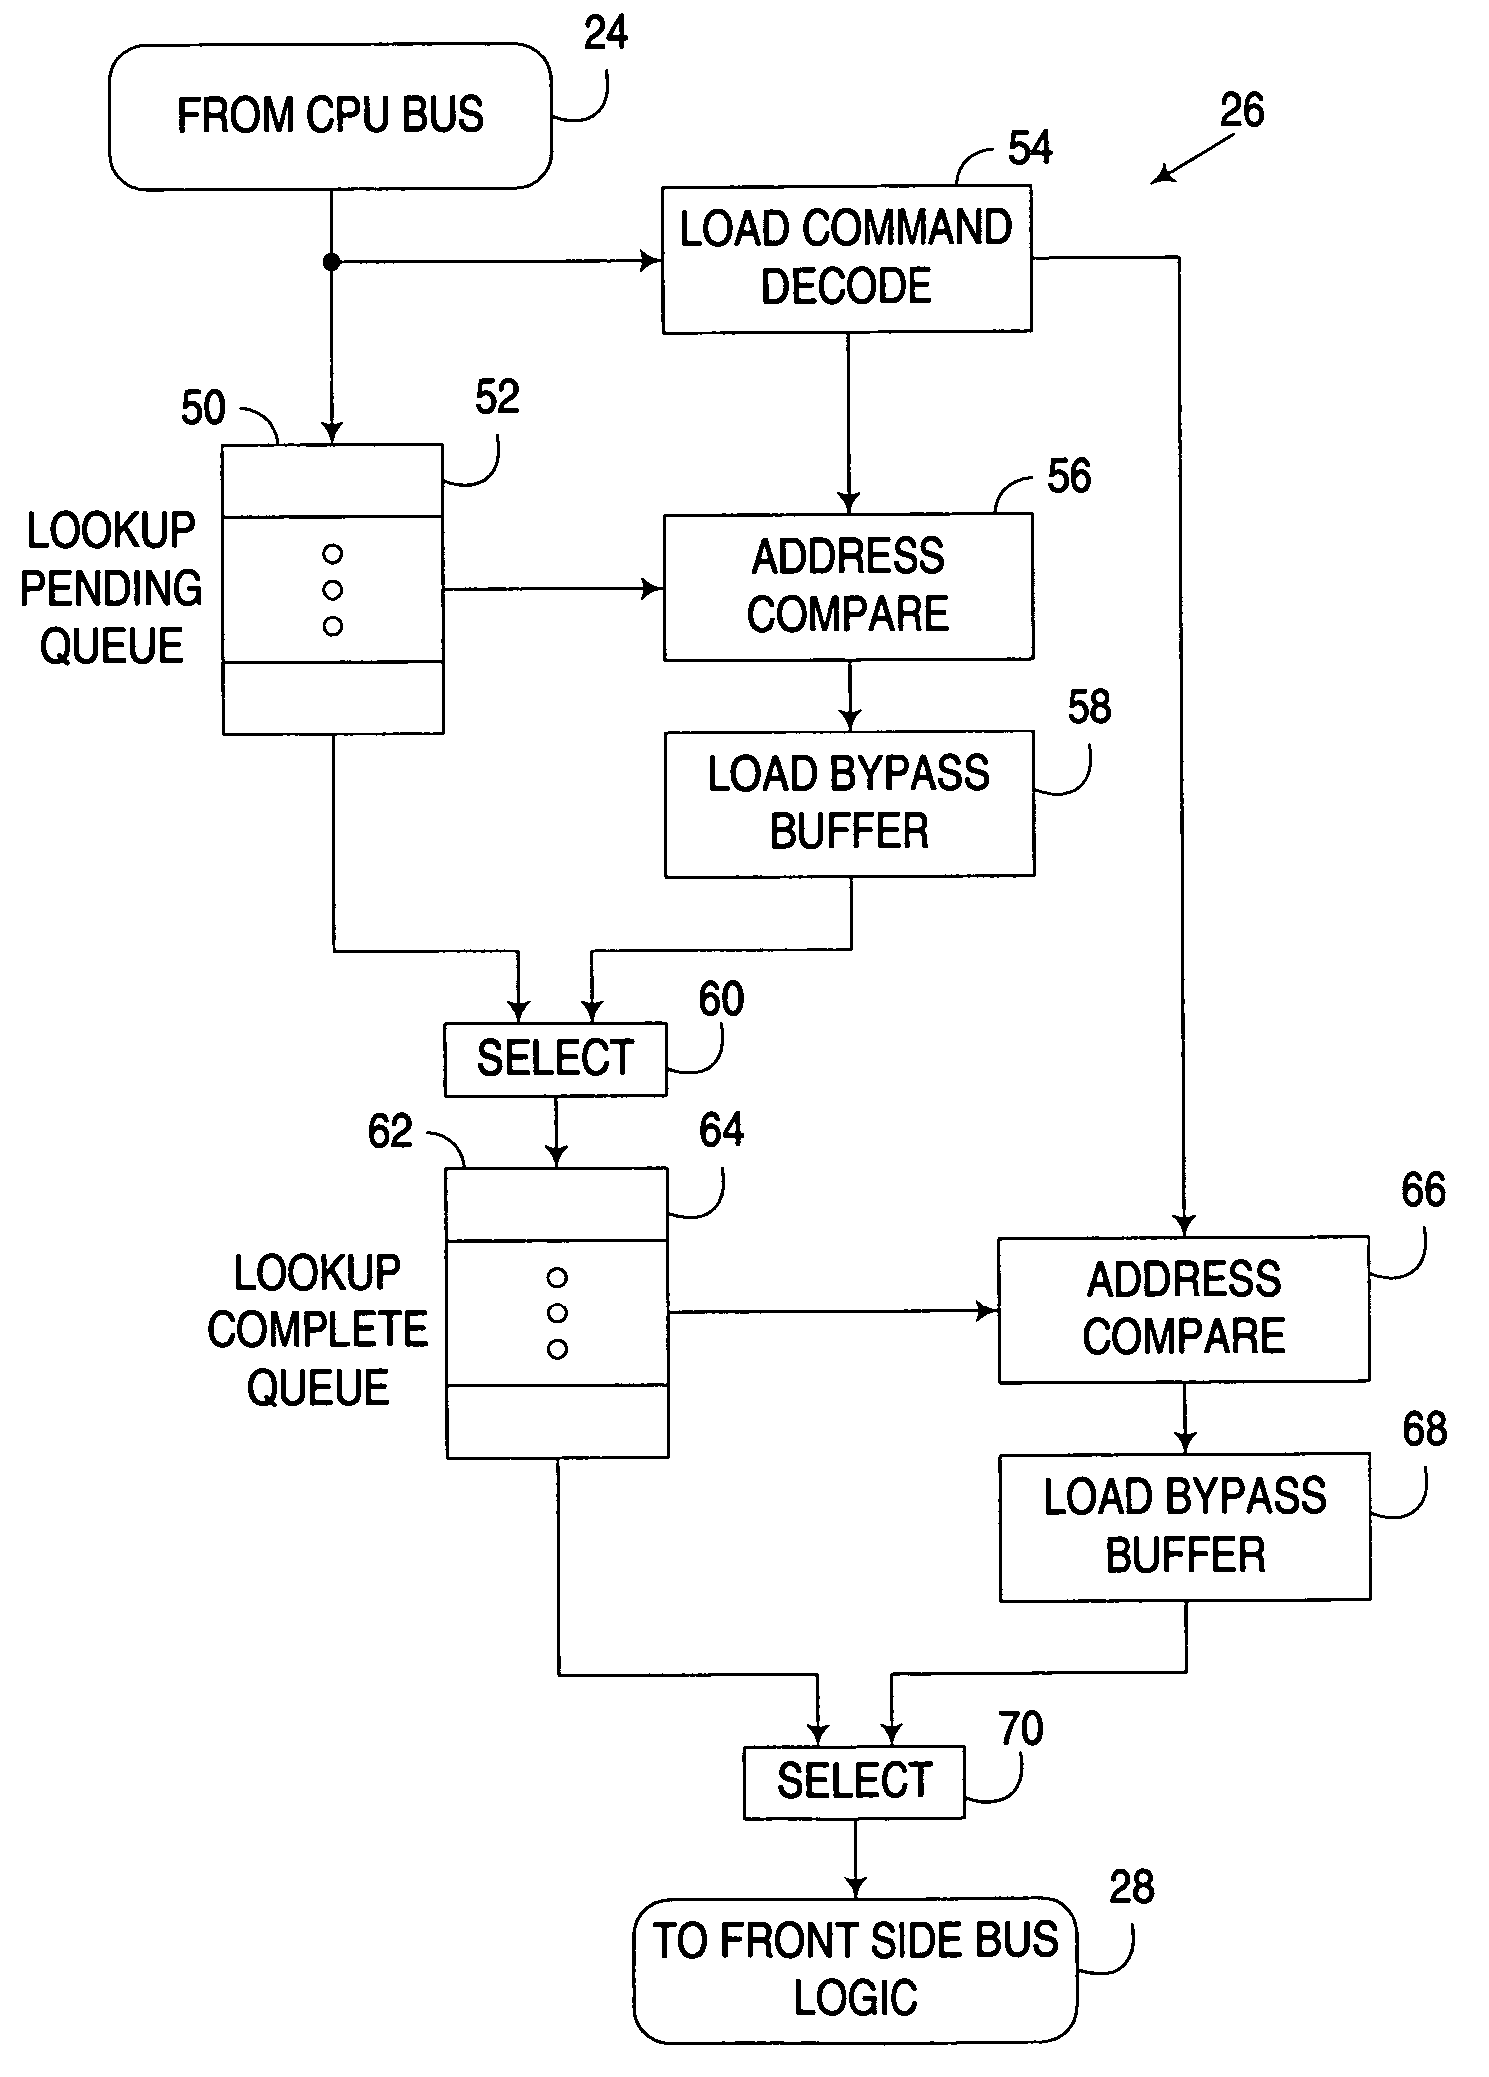 Fast path memory read request processing in a multi-level memory architecture